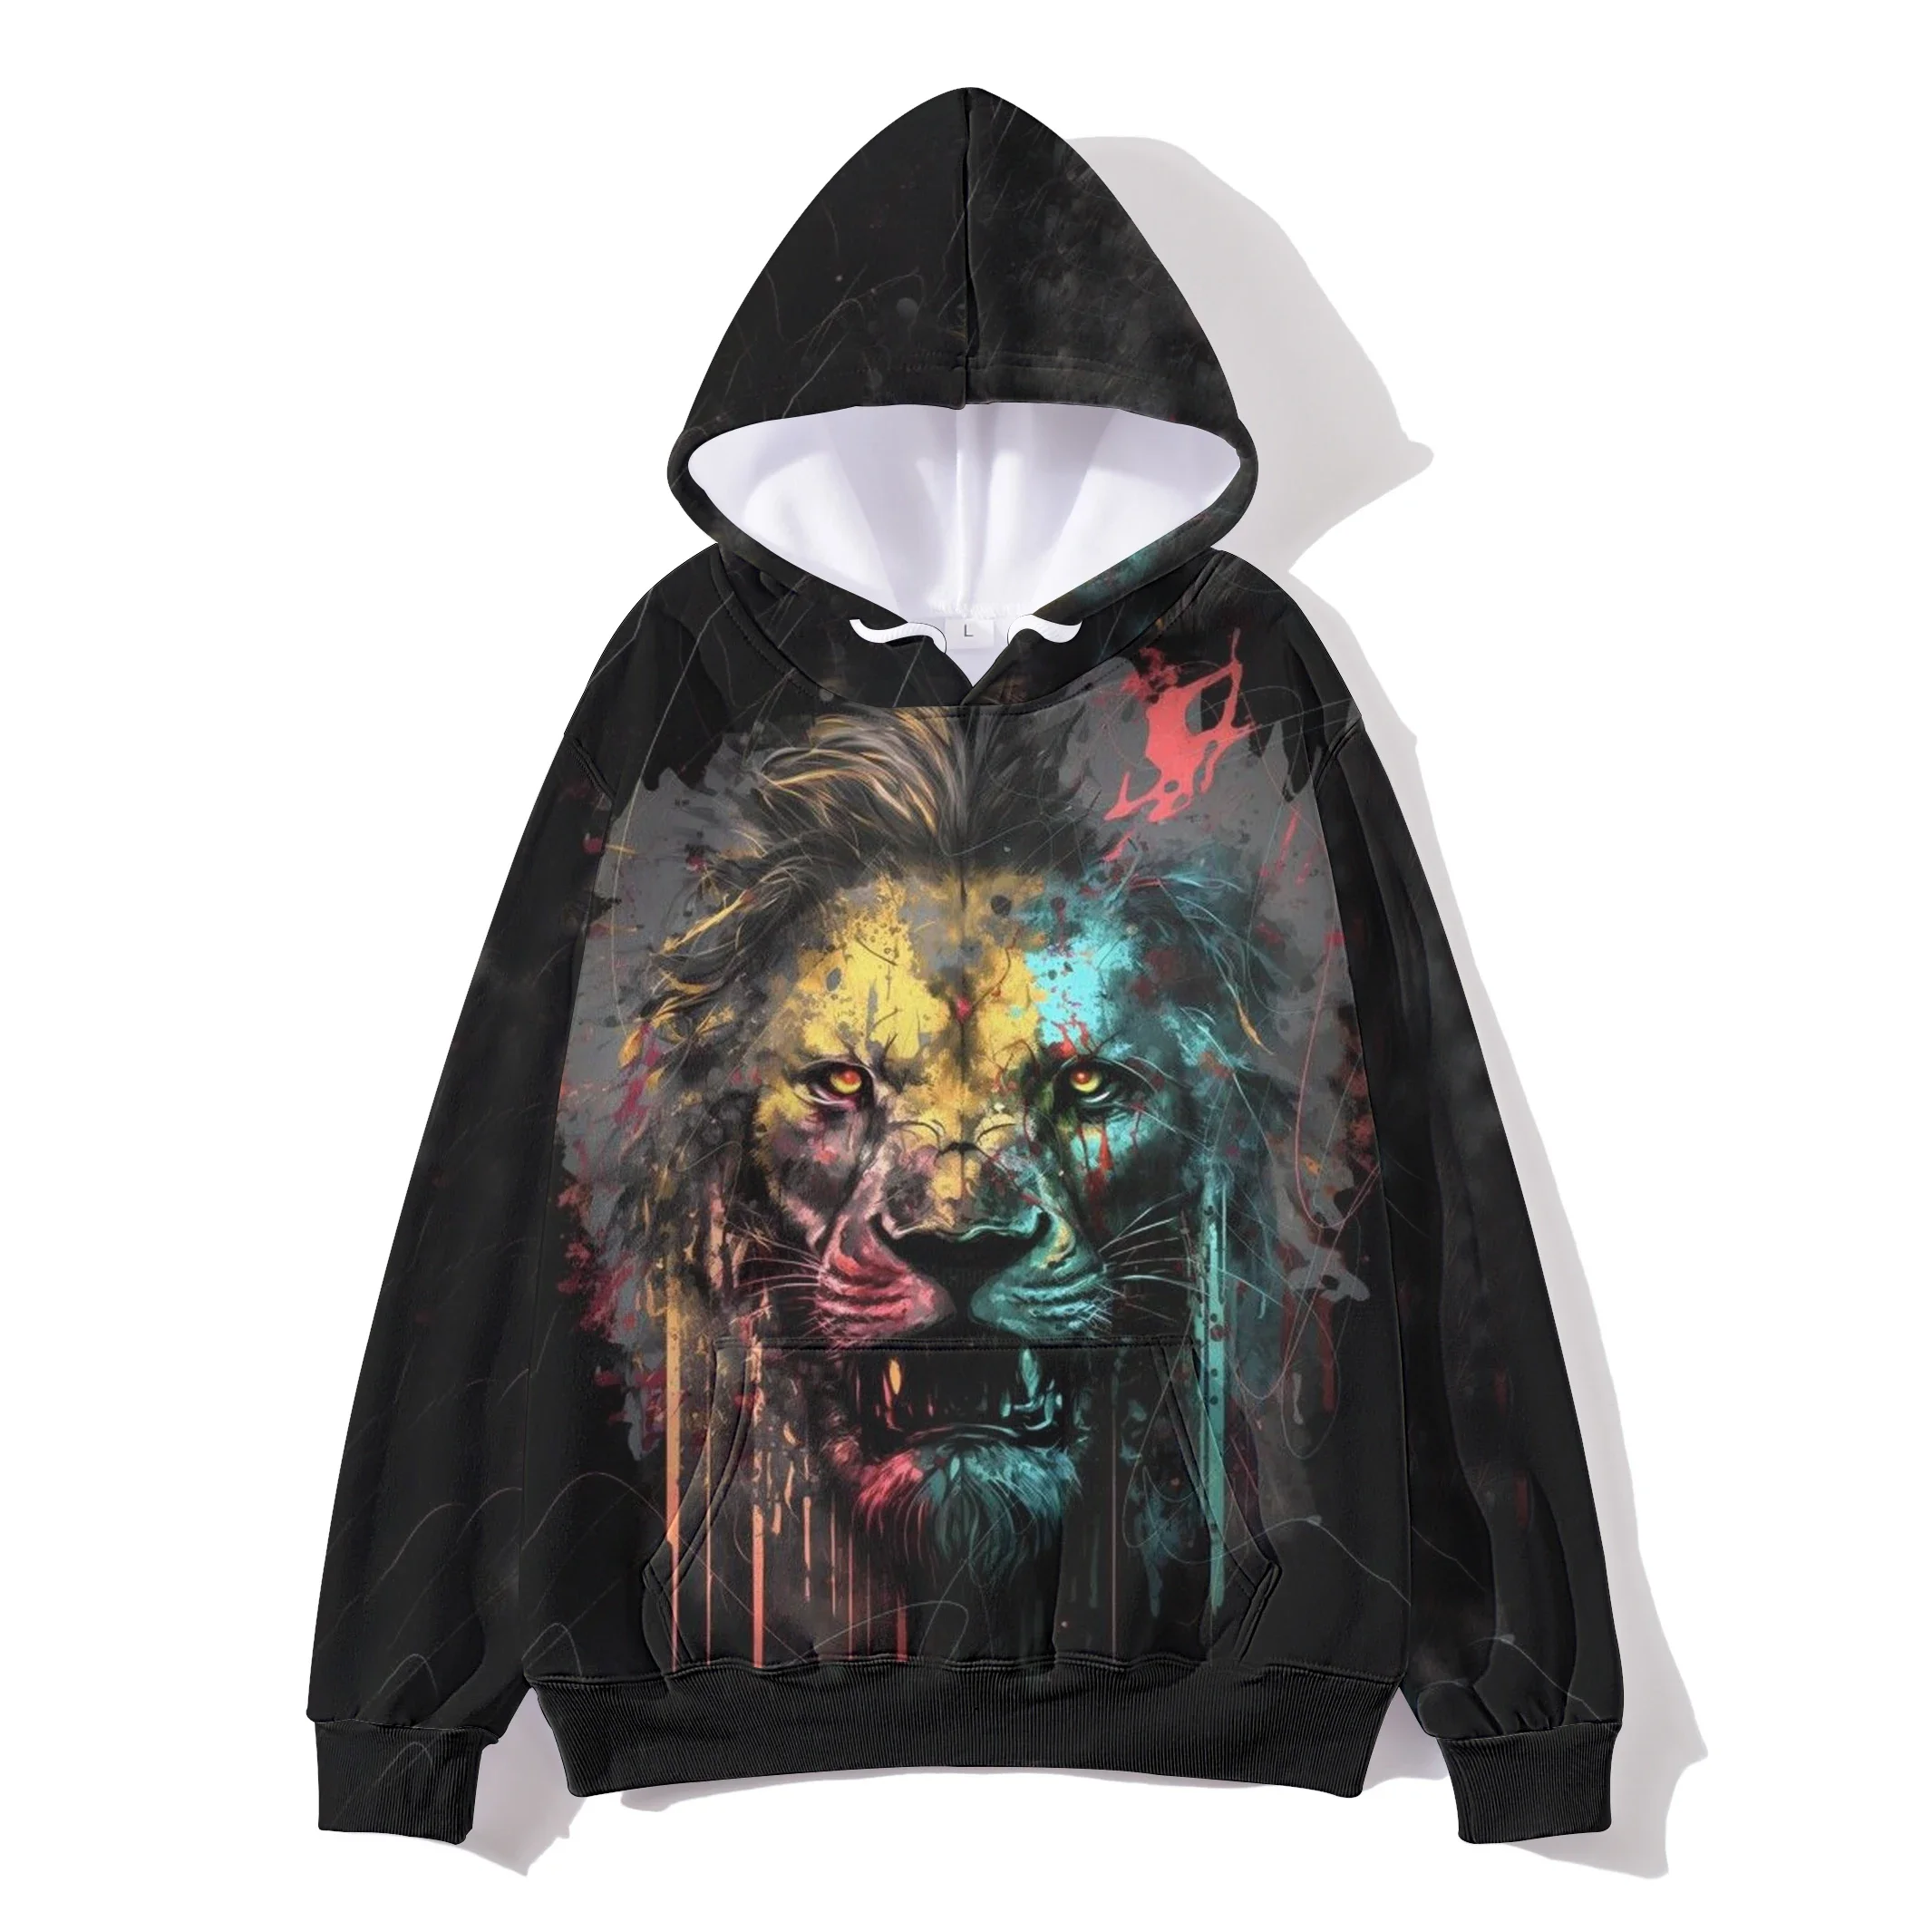 

Animal Dog Doggy Eagle Hoodie for Men Tops 3DGraffiti Wolf Printed New in Hoodies Womens Clothing Harajuku Fashion lion Pullover